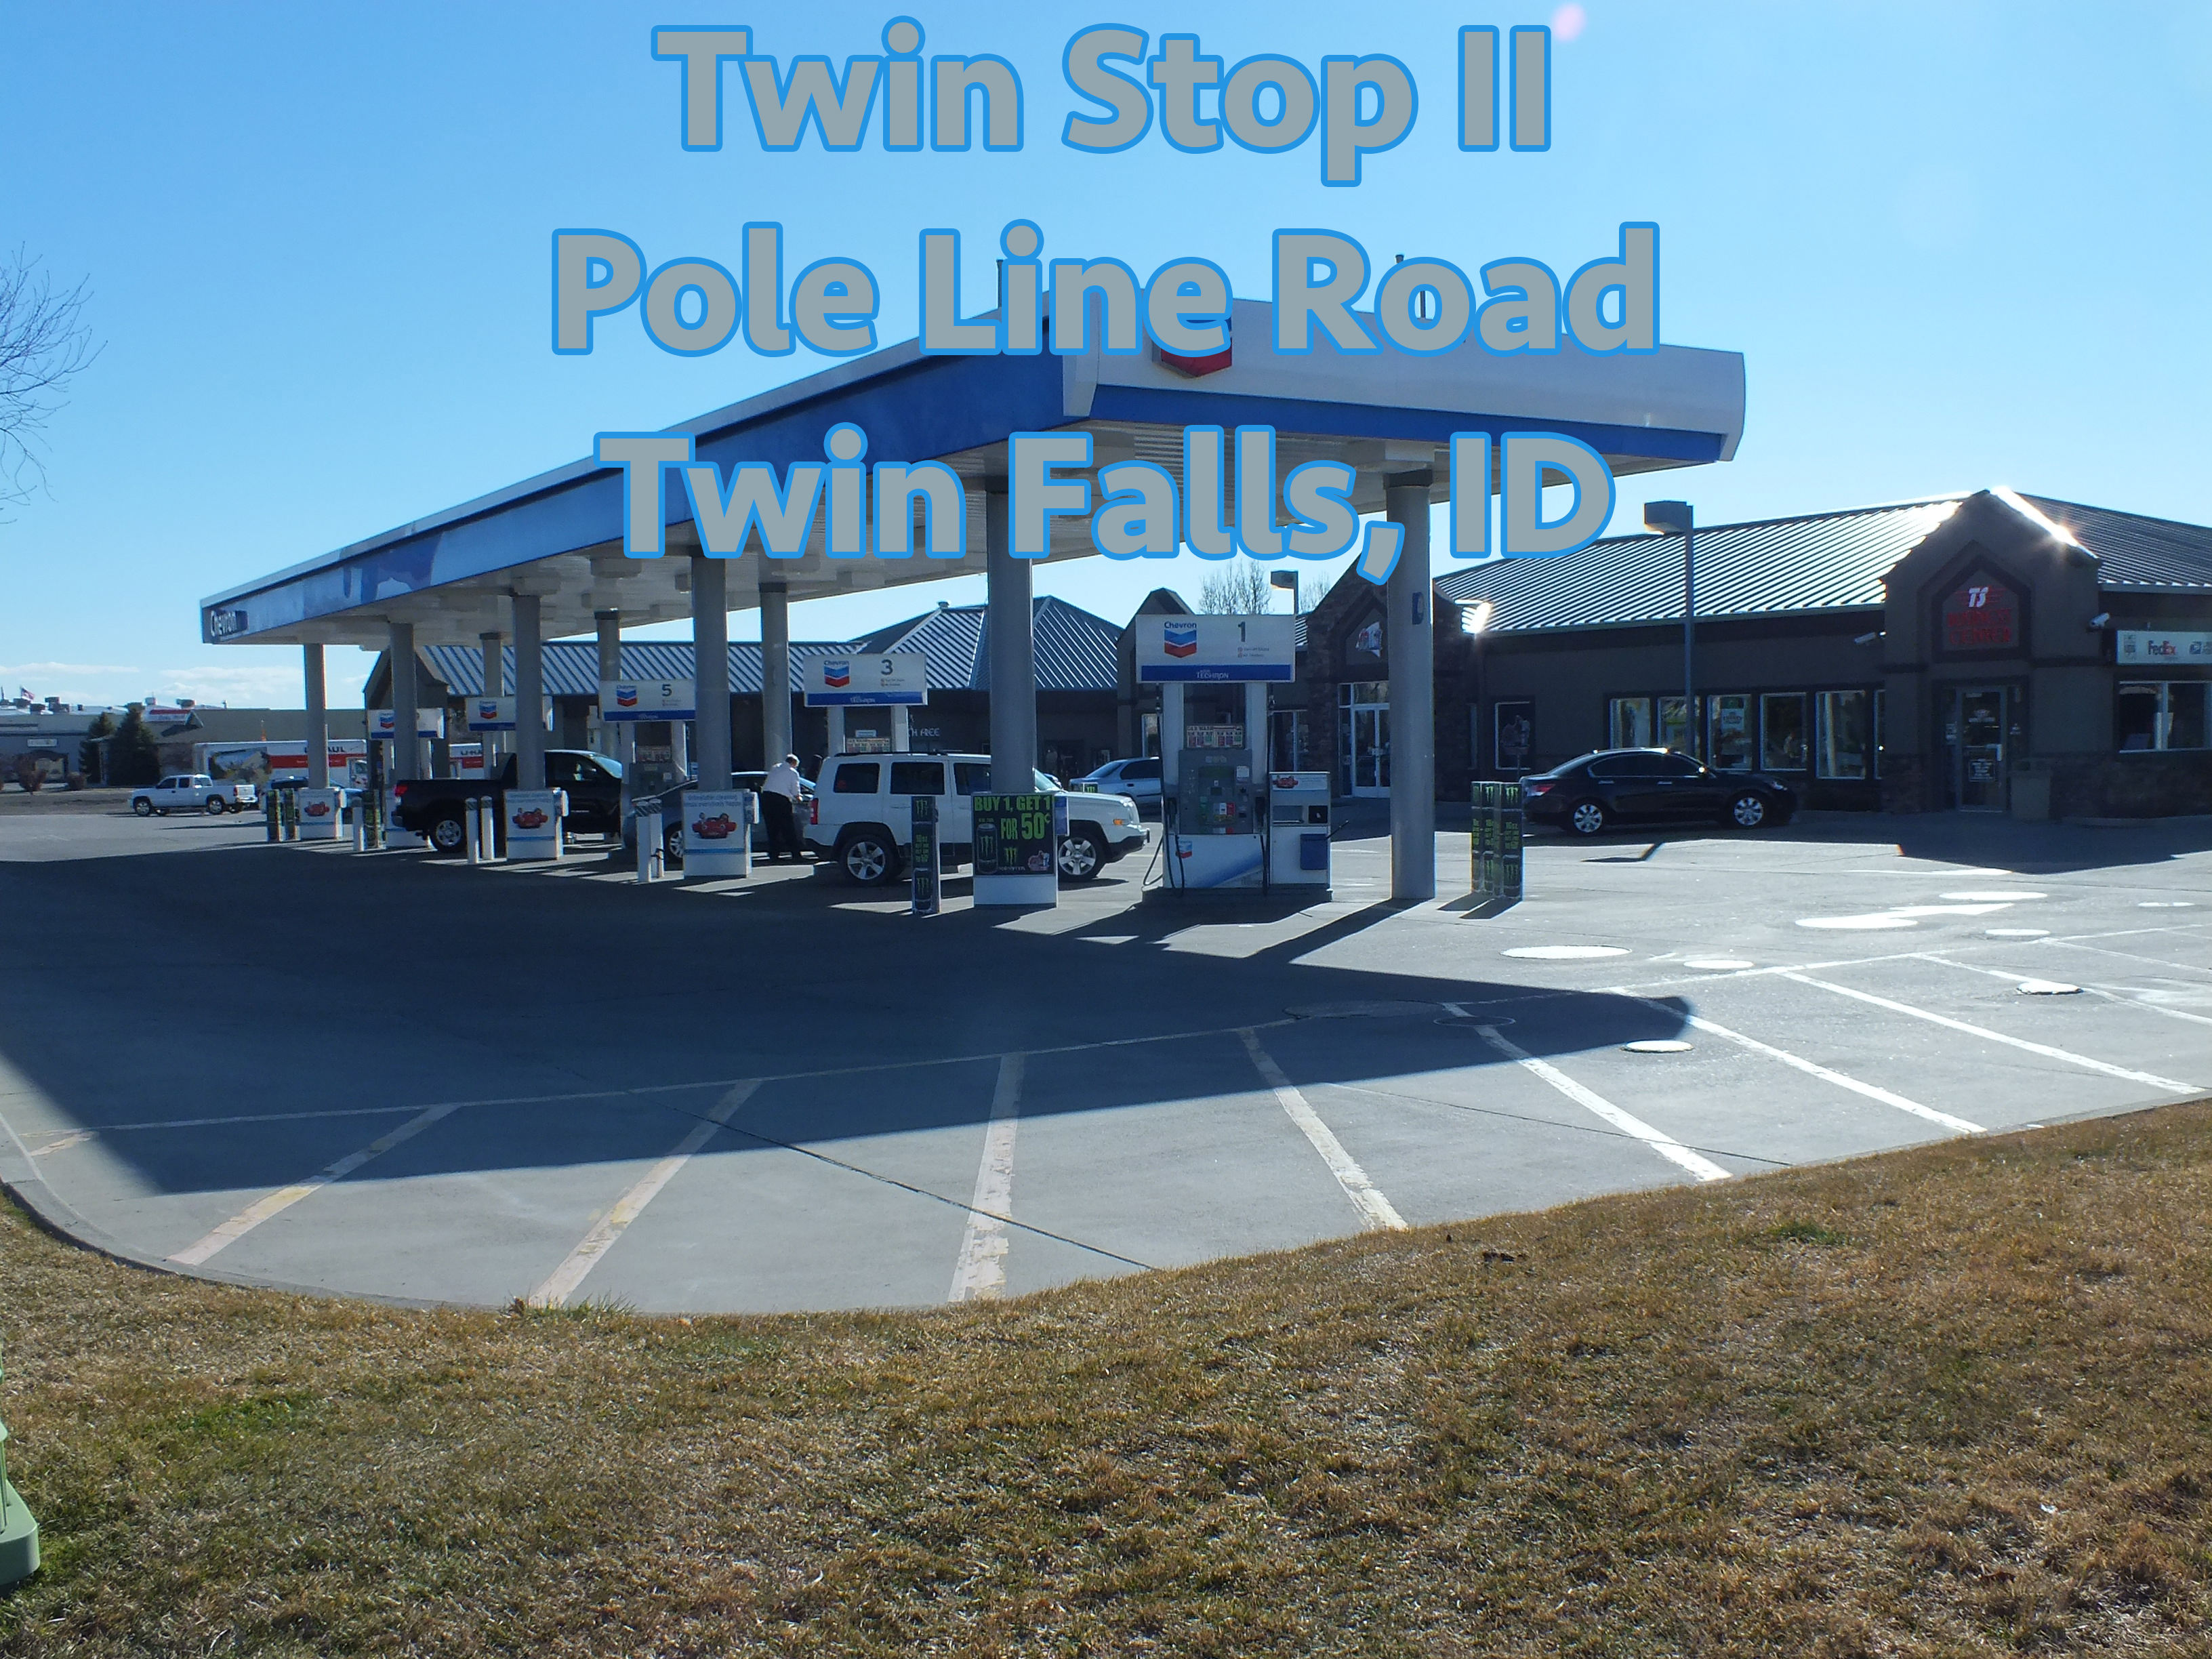 Pole Line Road with text